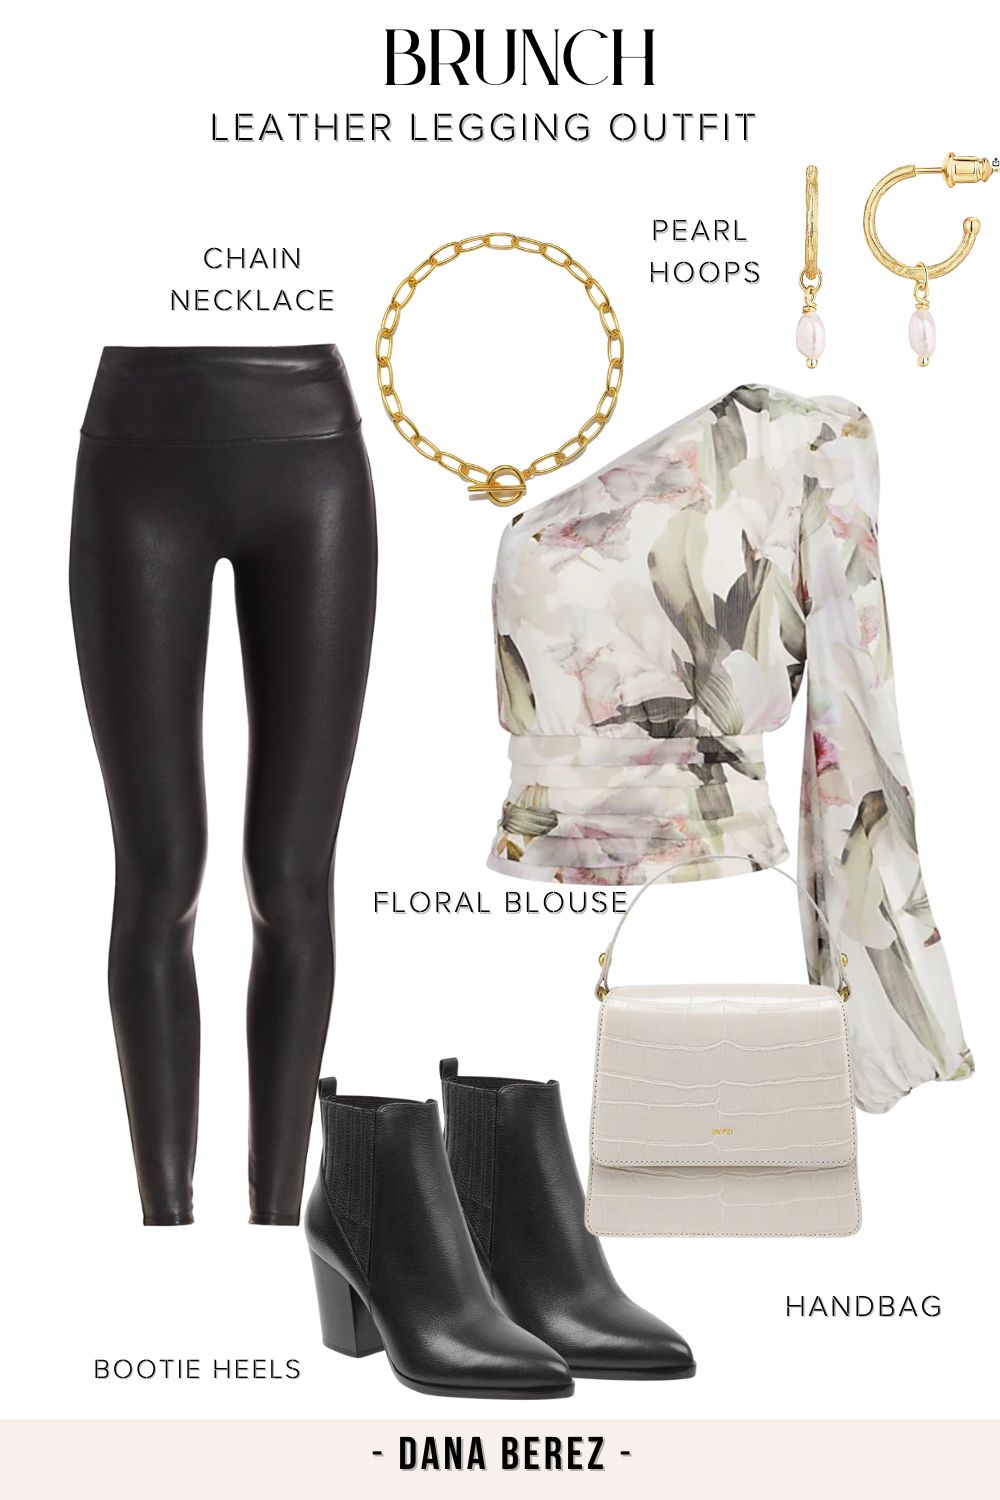 Leather Leggings Outfit for Brunch